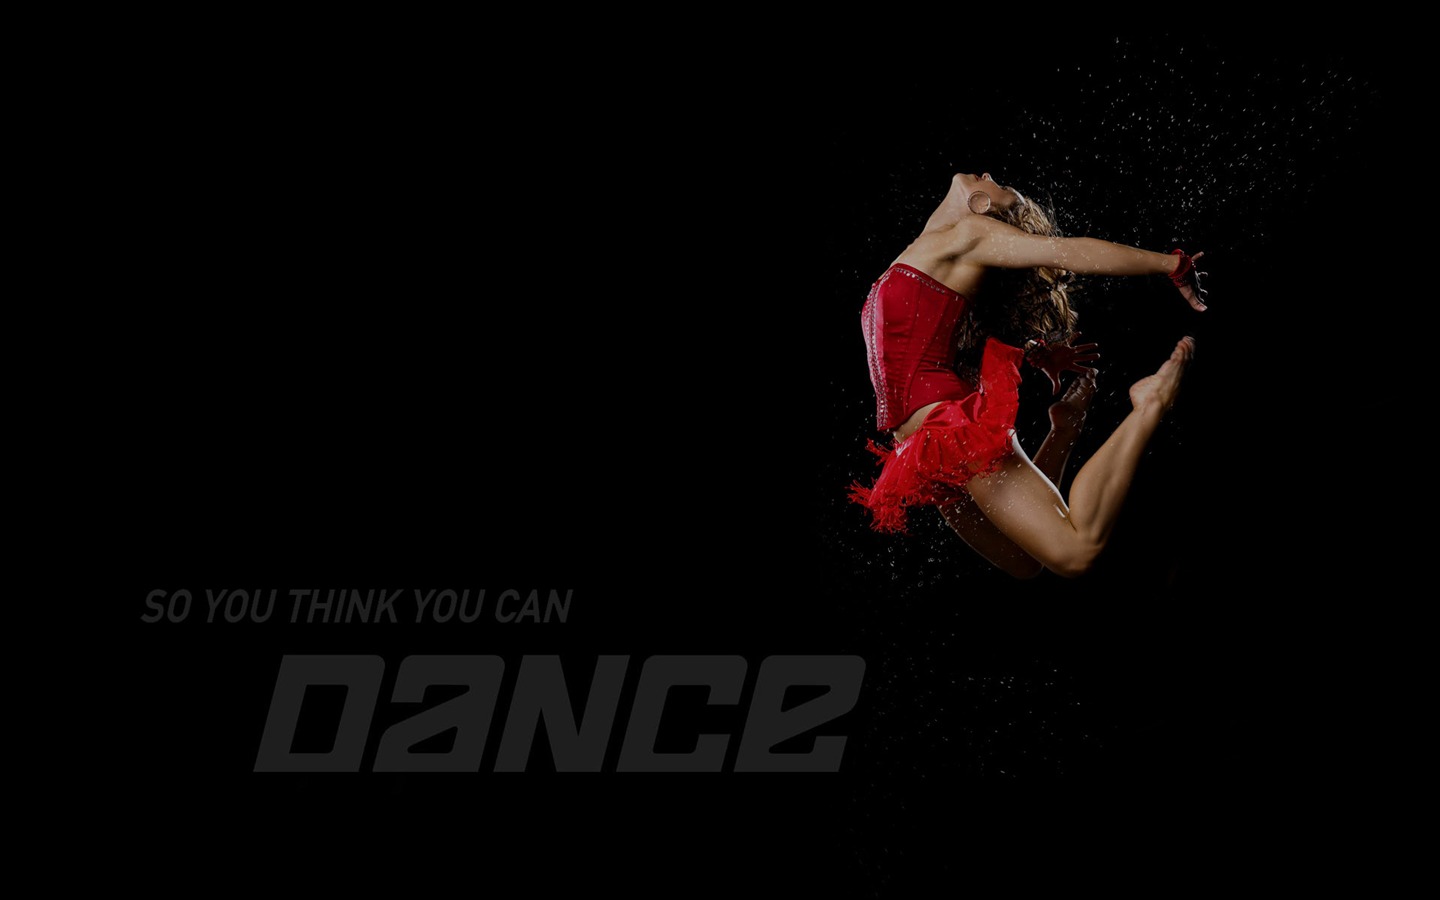 So You Think You Can Dance 舞林爭霸壁紙(二) #1 - 1440x900